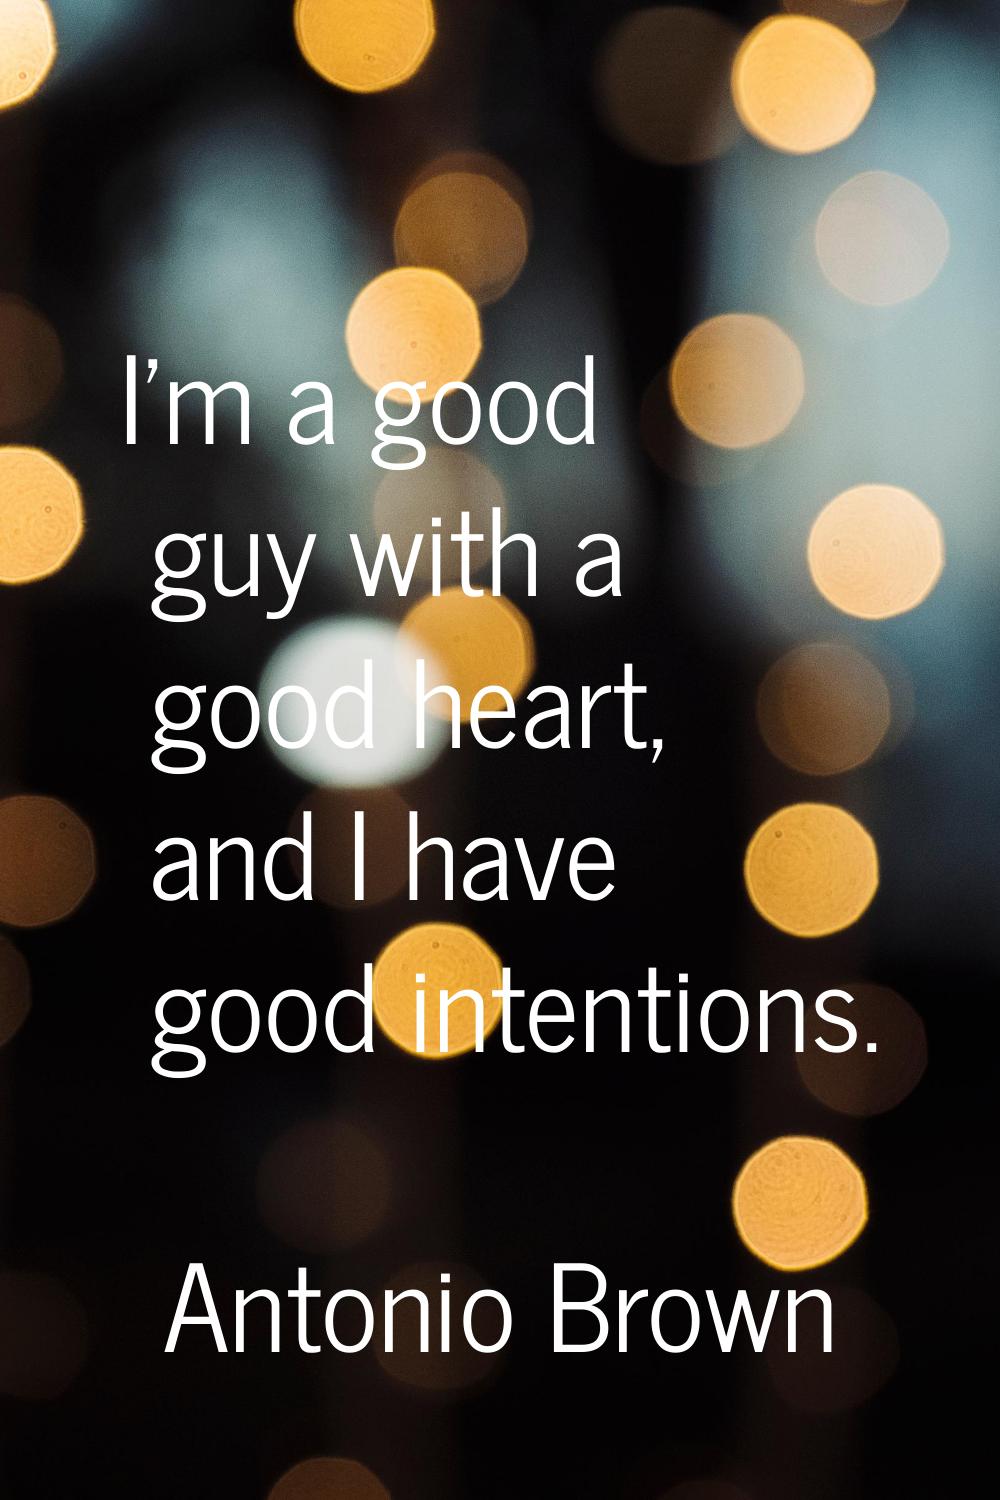 I'm a good guy with a good heart, and I have good intentions.